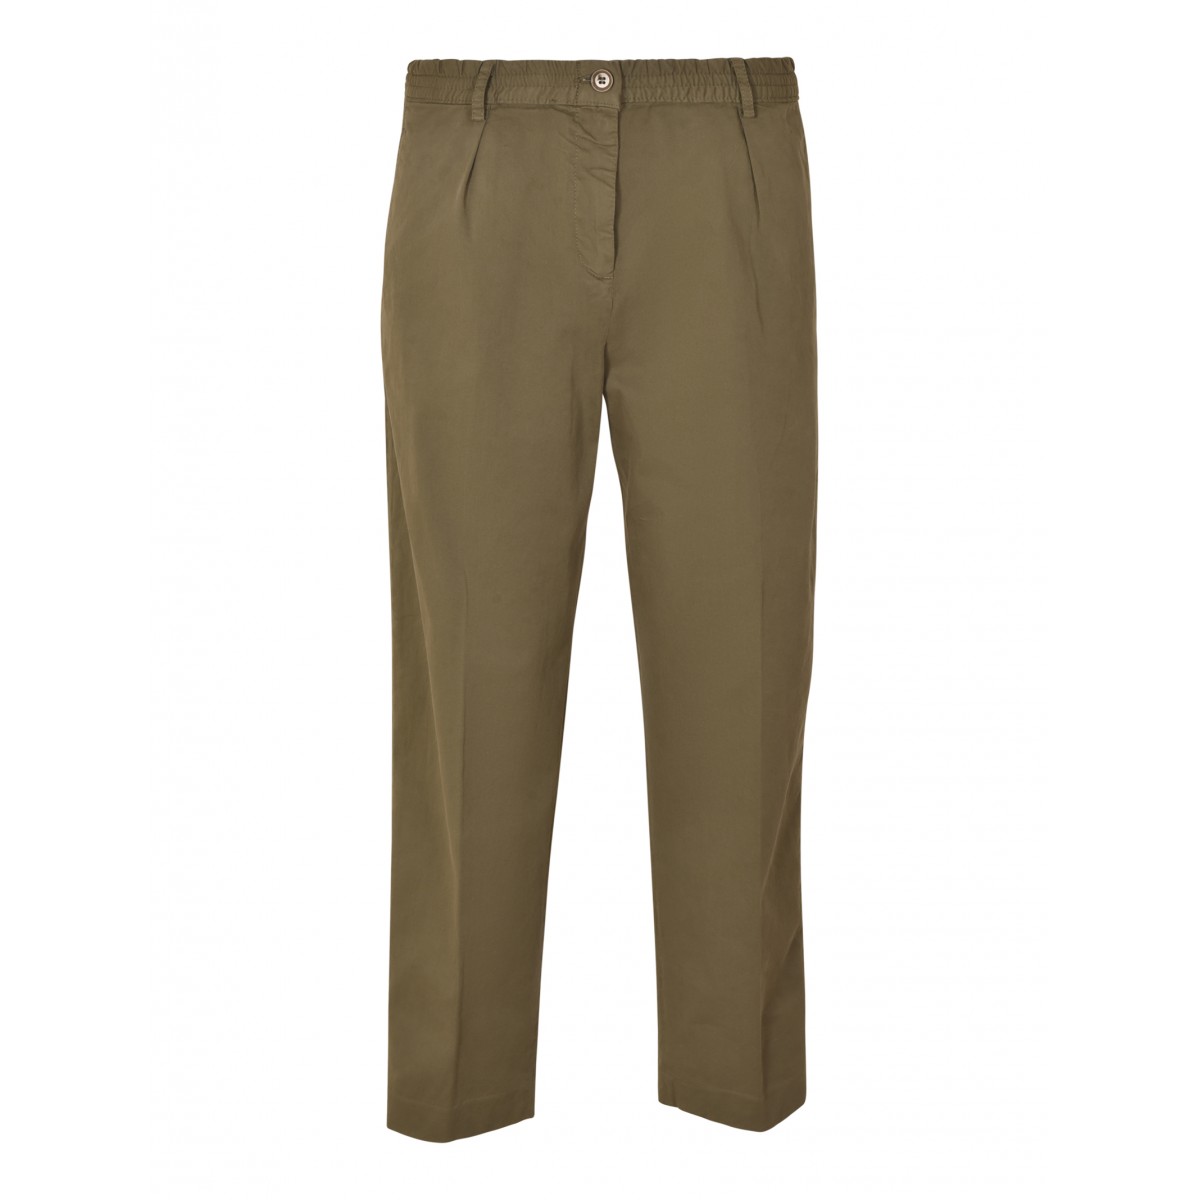 military trousers